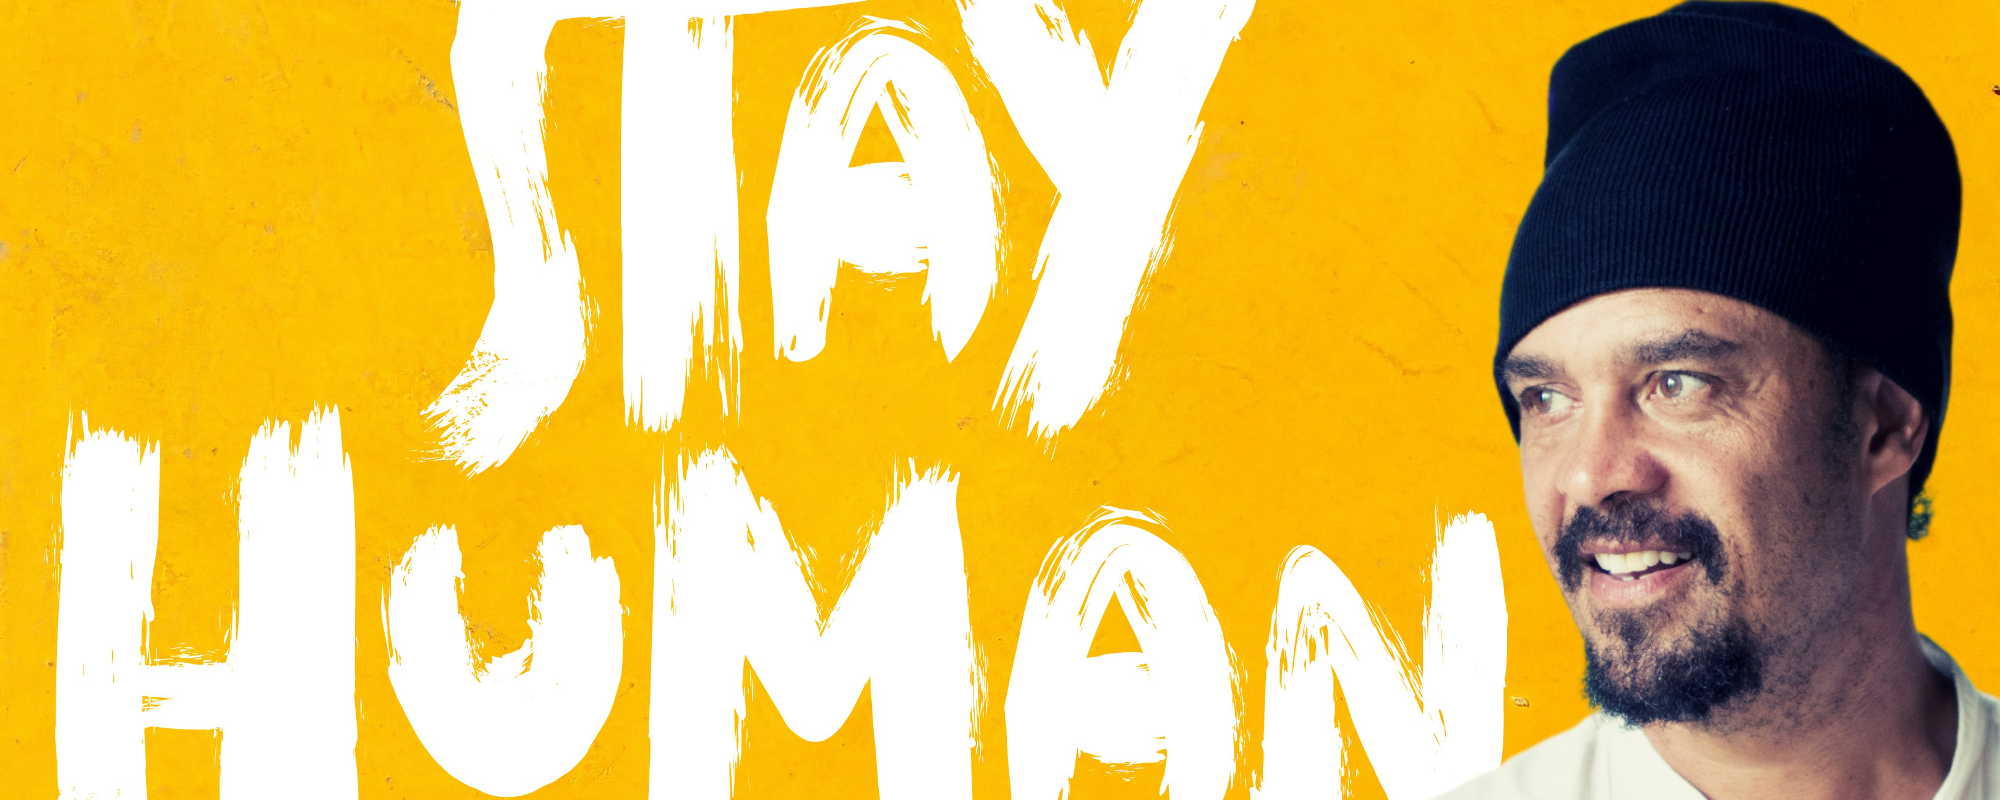 Gibson To Sponsor Michael Franti ‘Stay Human’ Podcast on American Songwriter Podcast Network